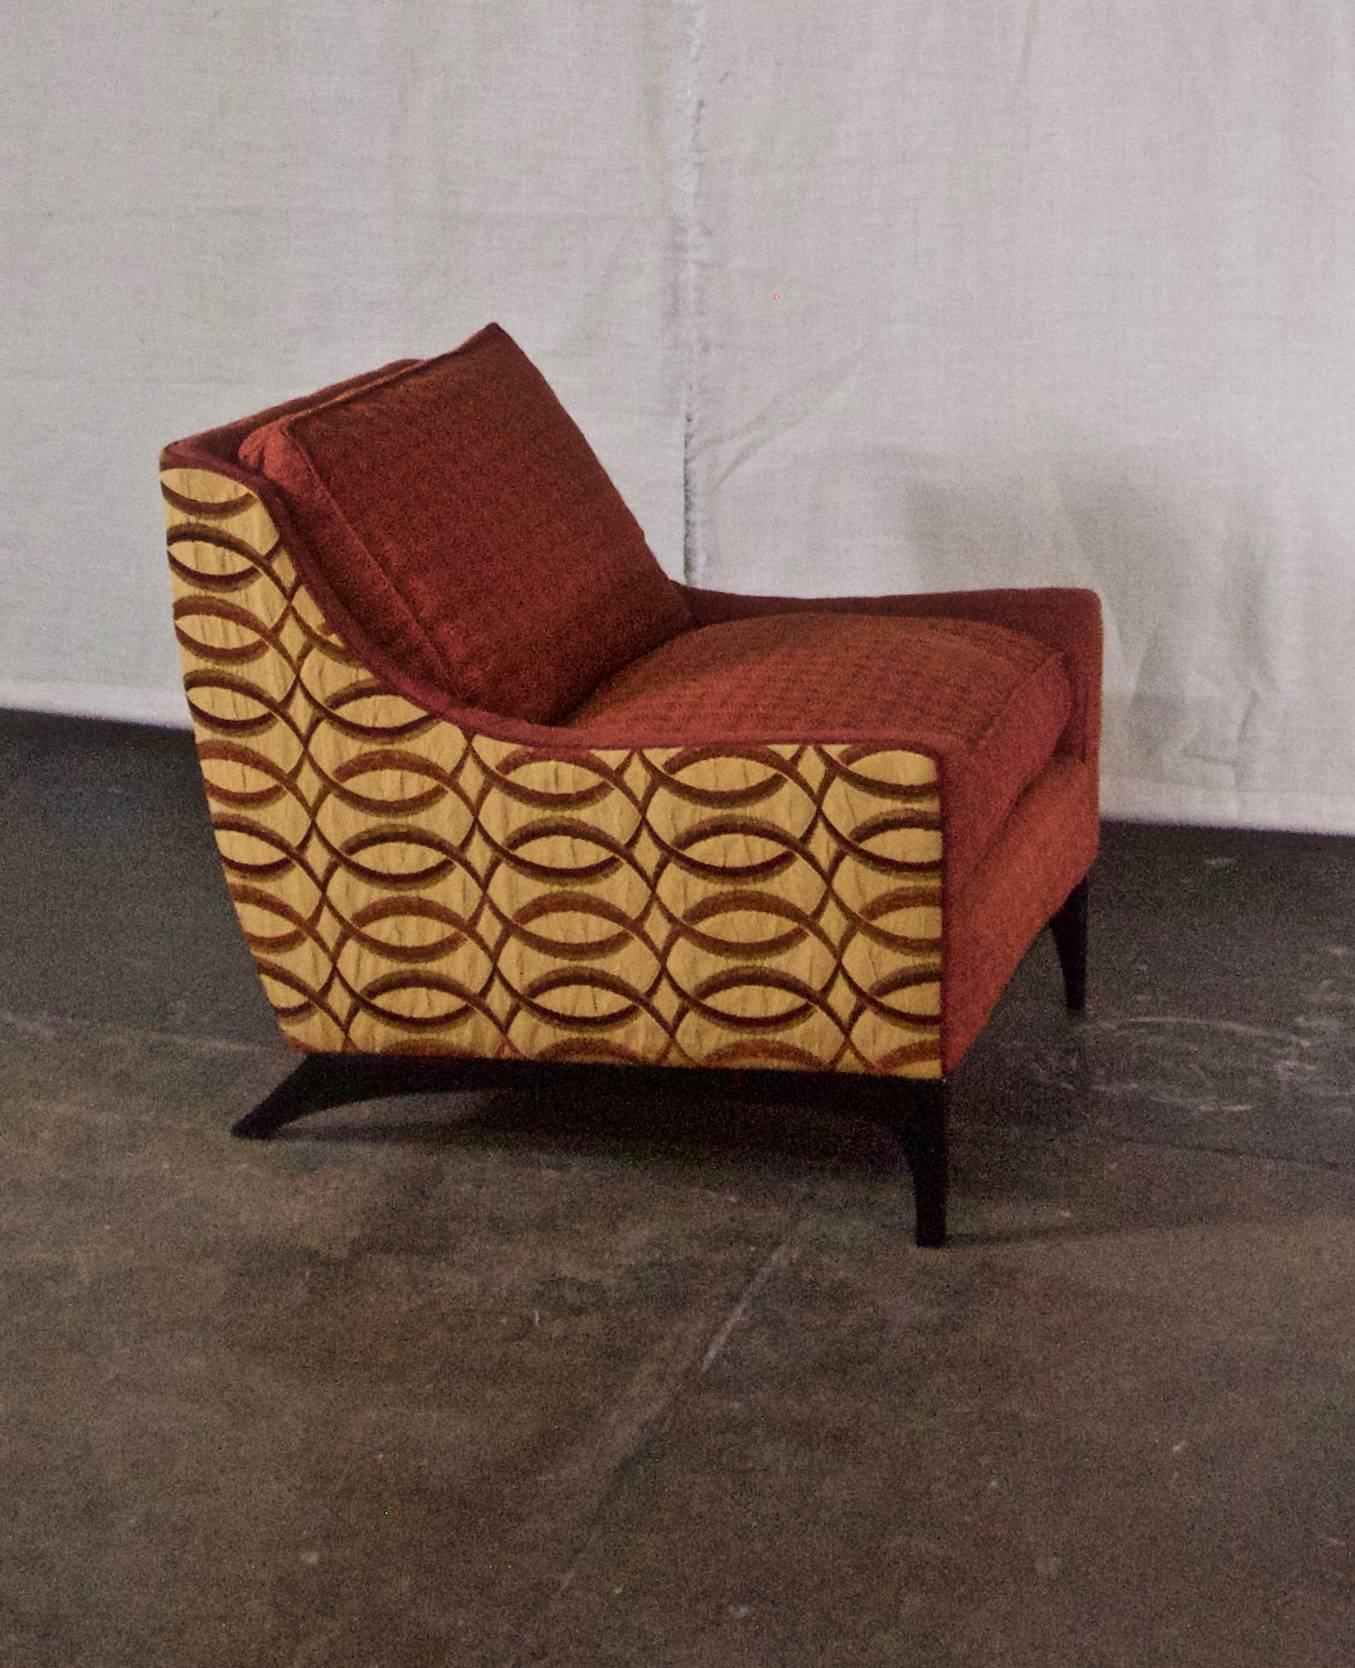 This midcentury lounge chair has super comfortable down/feather cushions and a style that suggests fluidity and motion. Woven fabrics are a combination of gold and deep red, as seen in photos. Base and legs are wood, stained black.

Vintage frame,